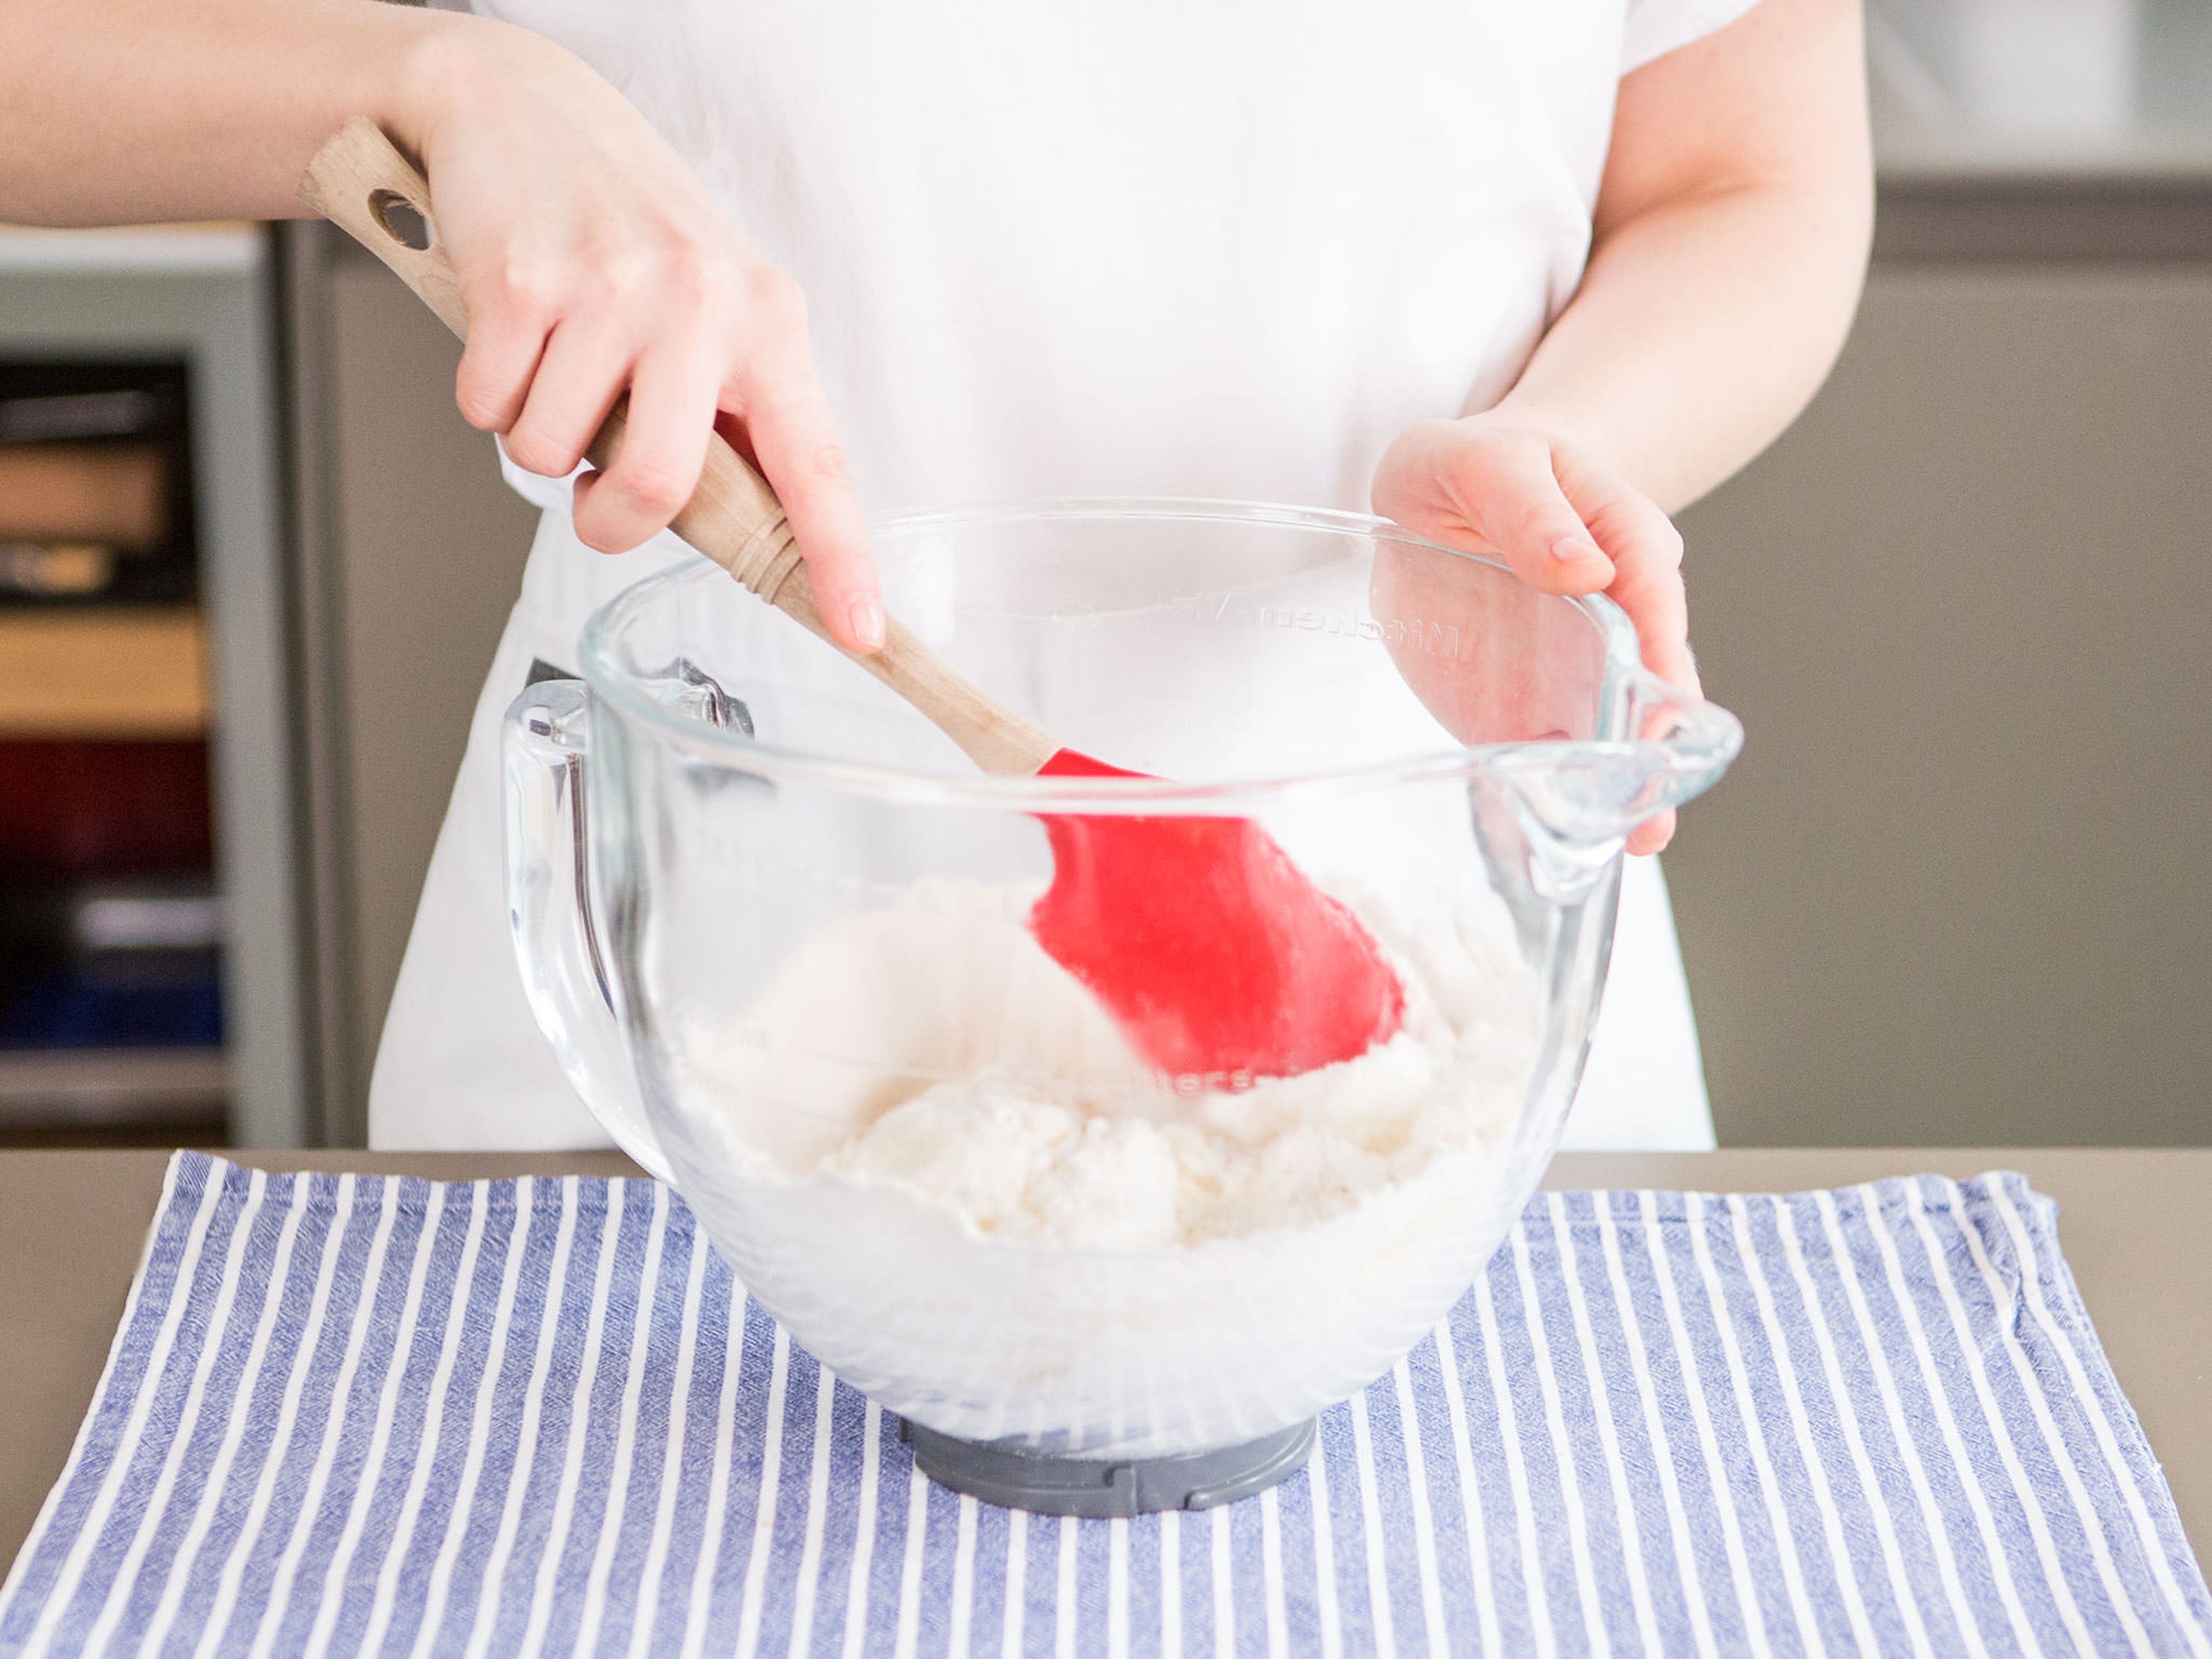 Carefully fold sugar and almond mixture into egg whites.